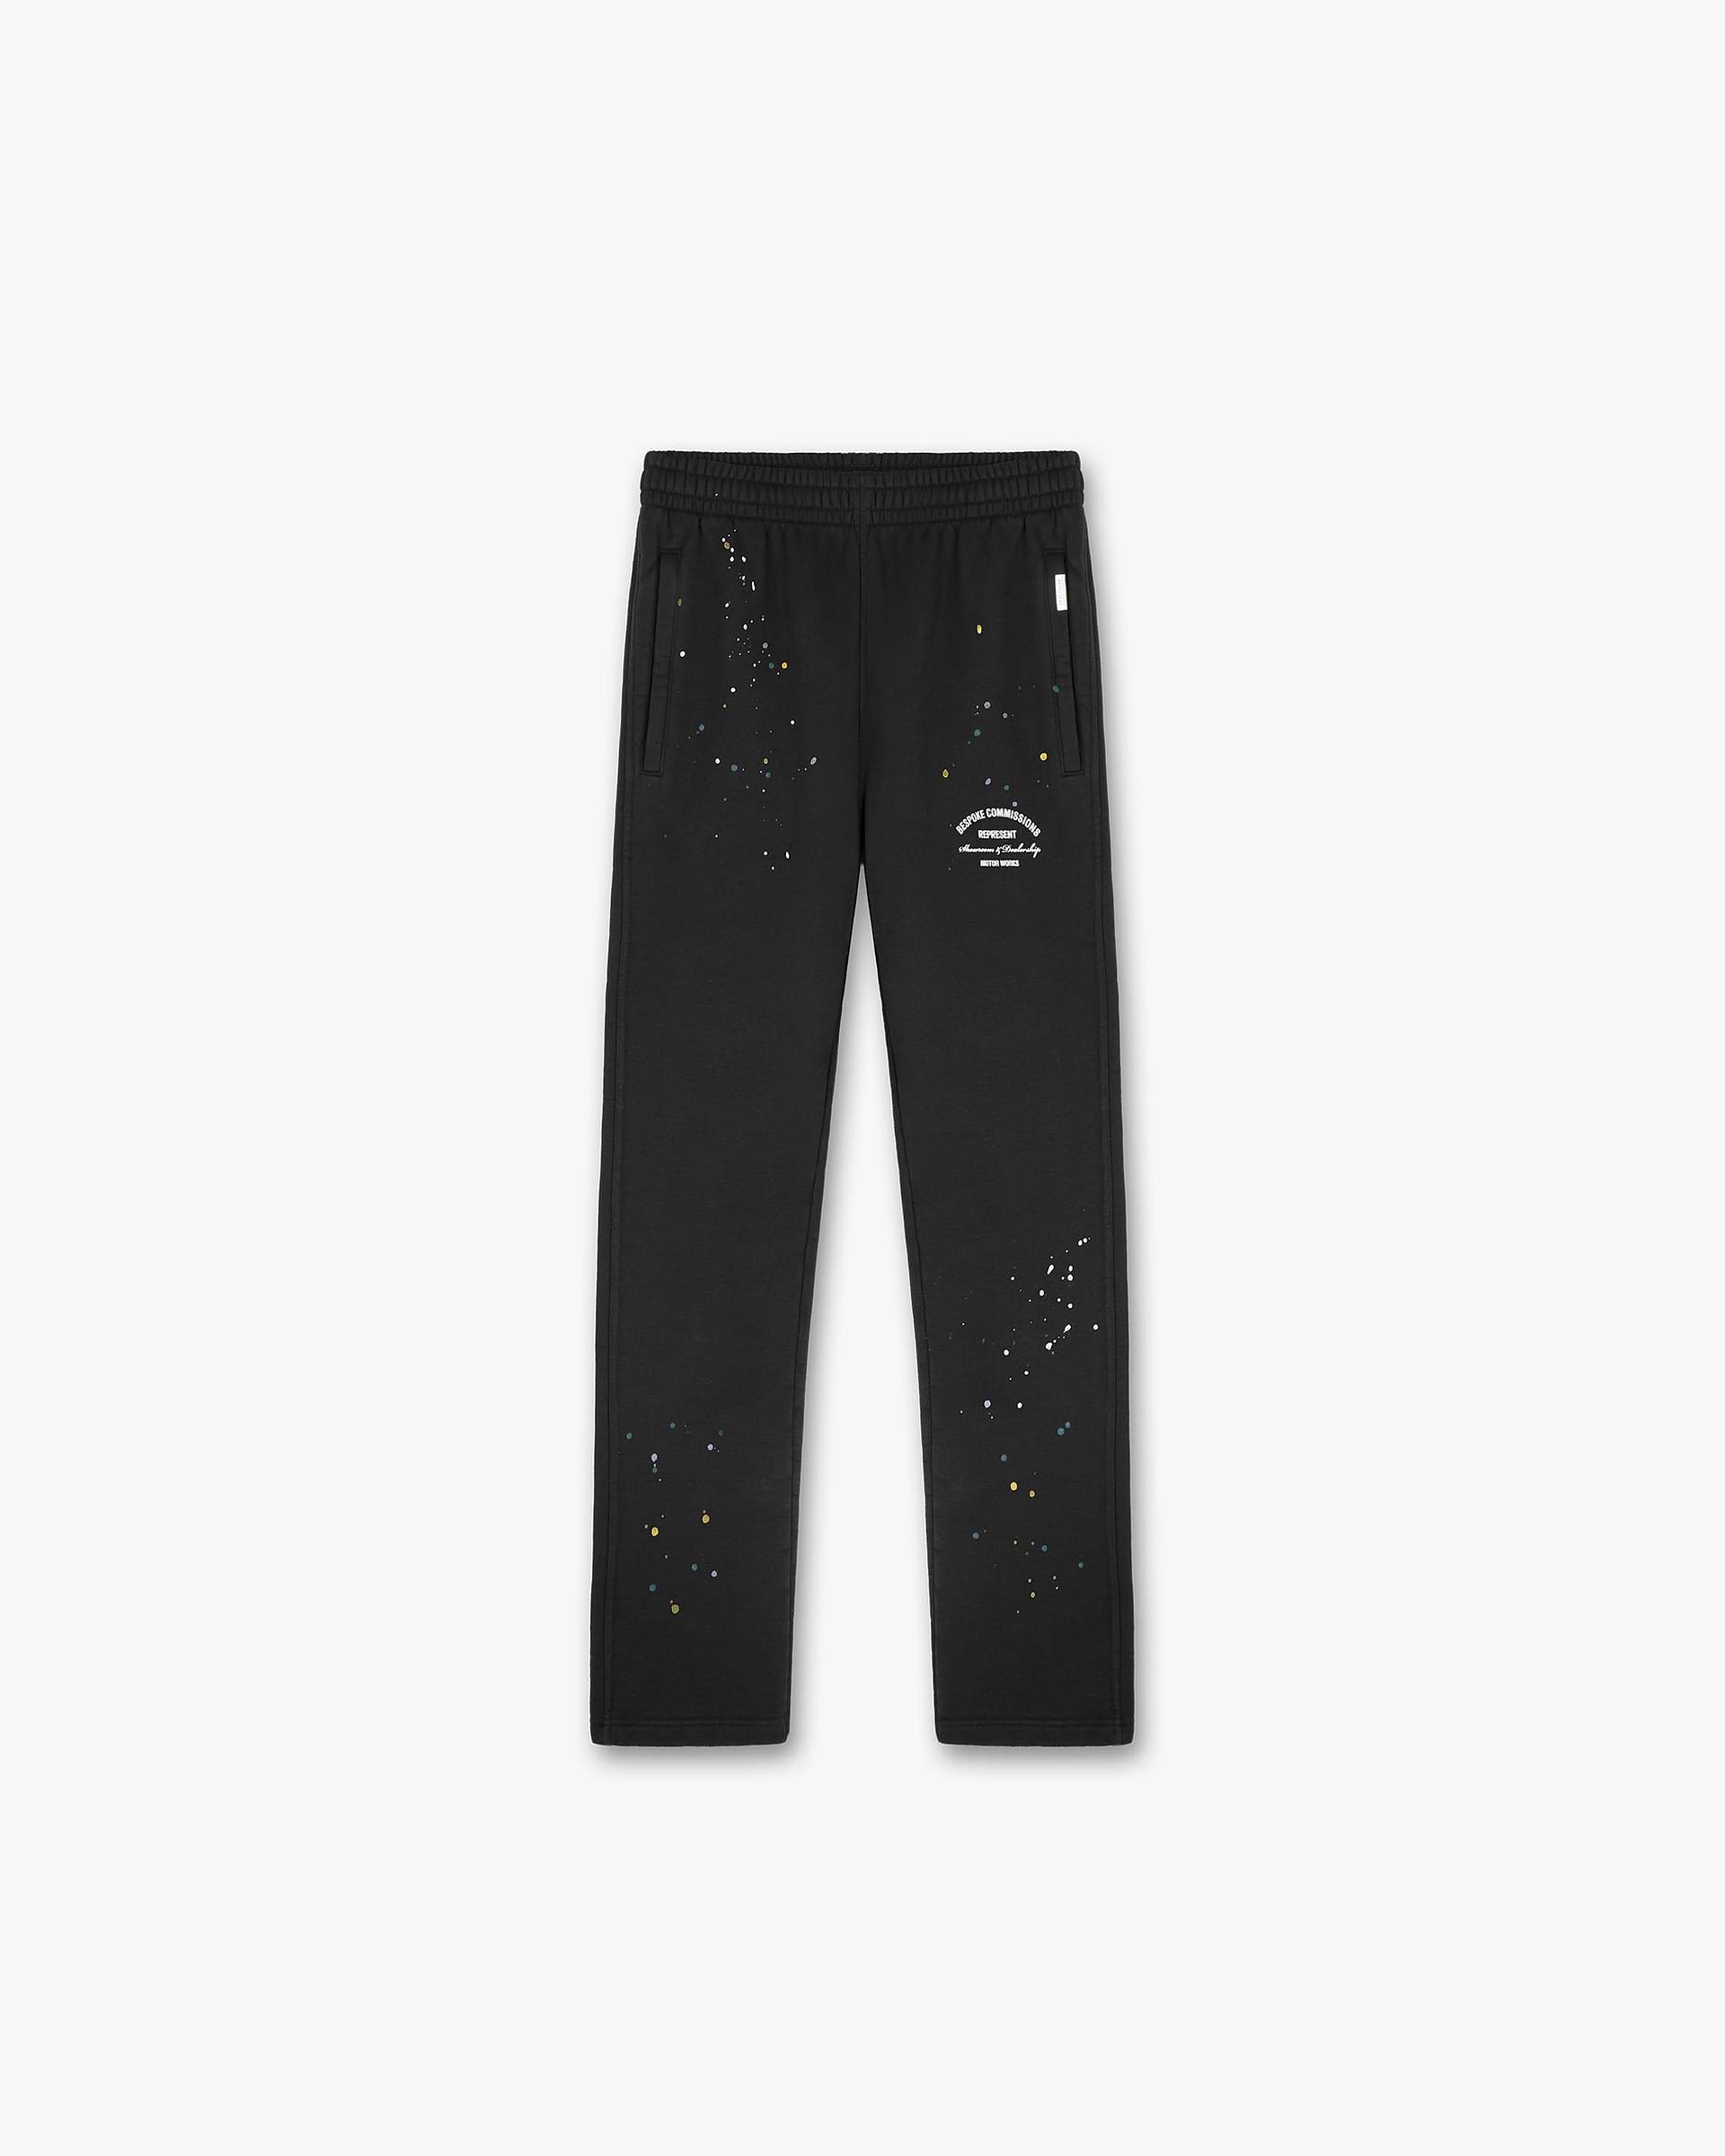 Bespoke Commissions Relaxed Sweatpant | Off Black Pants BESPOKE COMMISSIONS | Represent Clo